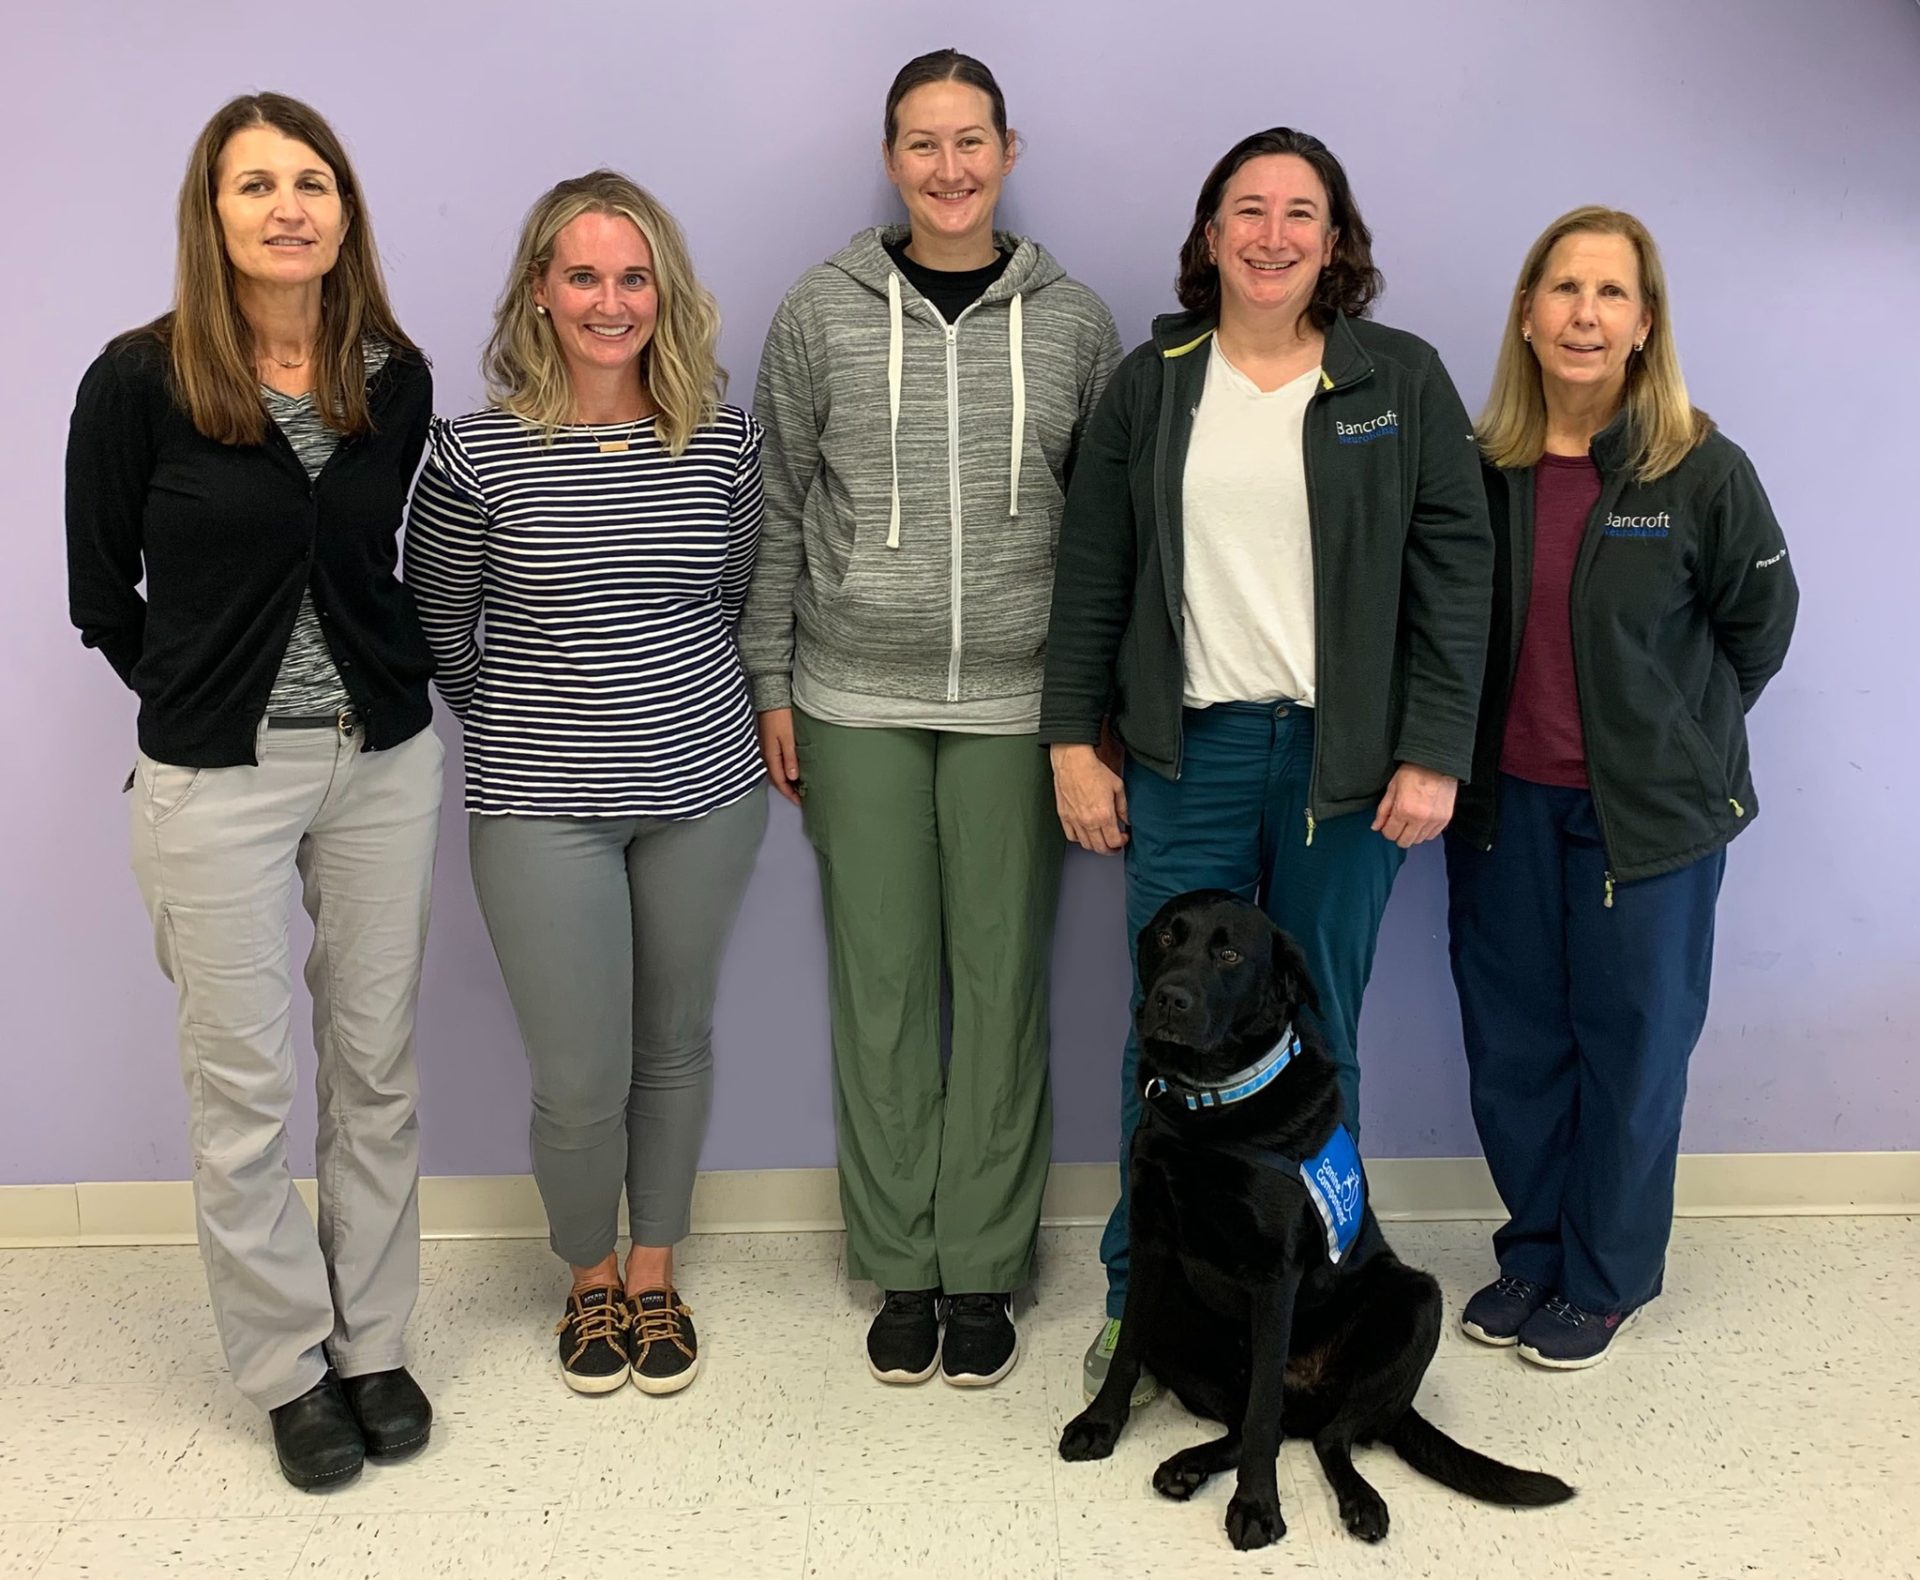 Bancroft NeuroRehab Clinicians smiling with therapy dog